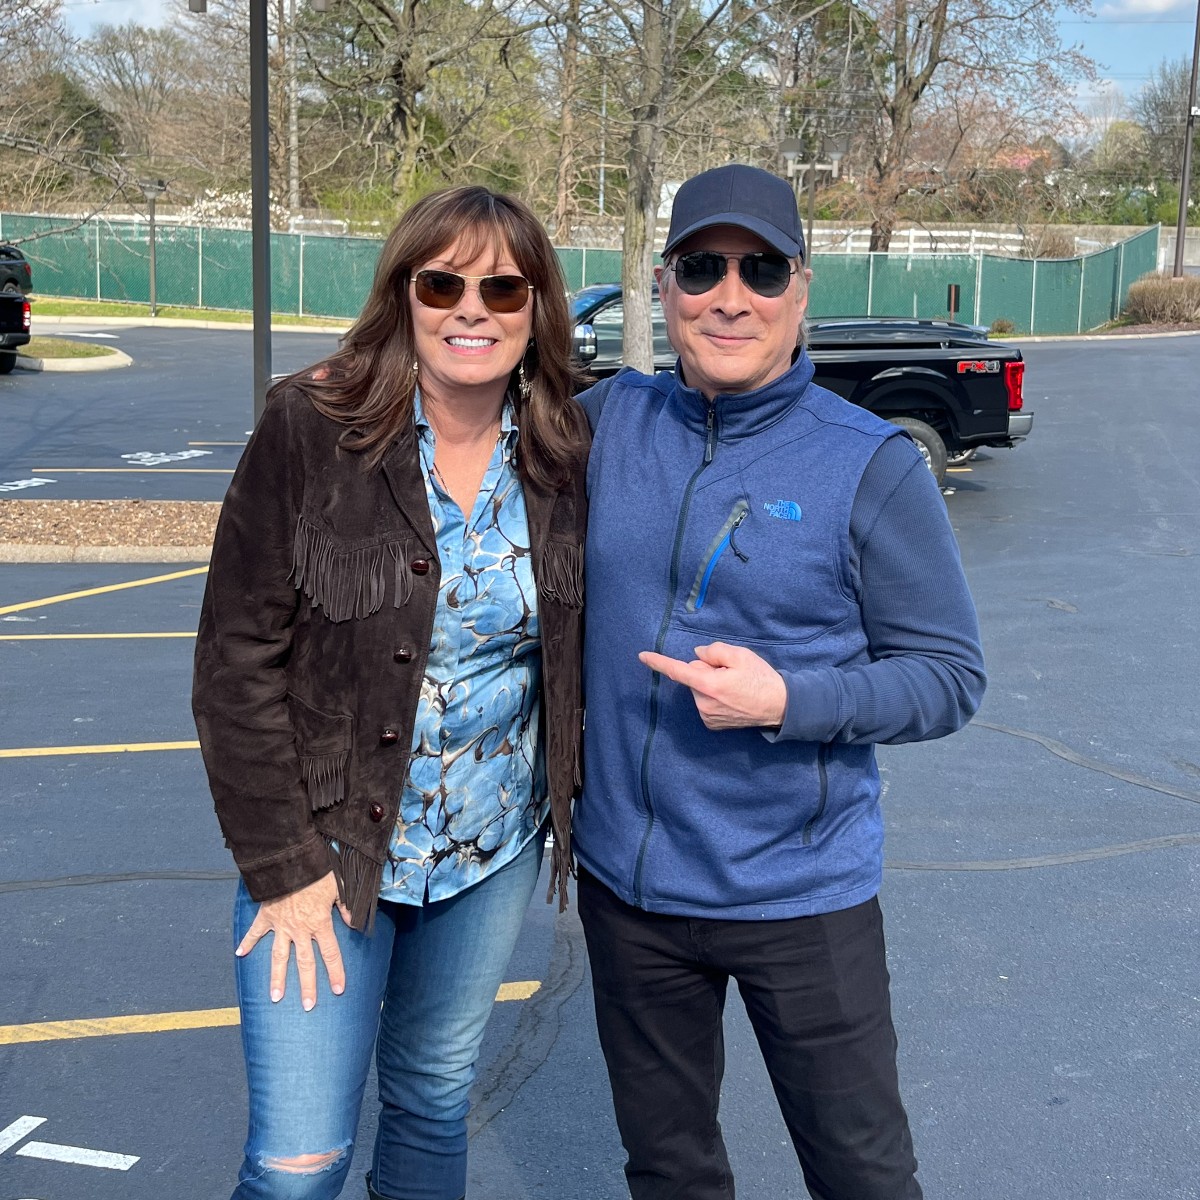 So good to run into the sweet and wonderful, Suzy Bogguss! That's just what happens in the Opry parking lot!